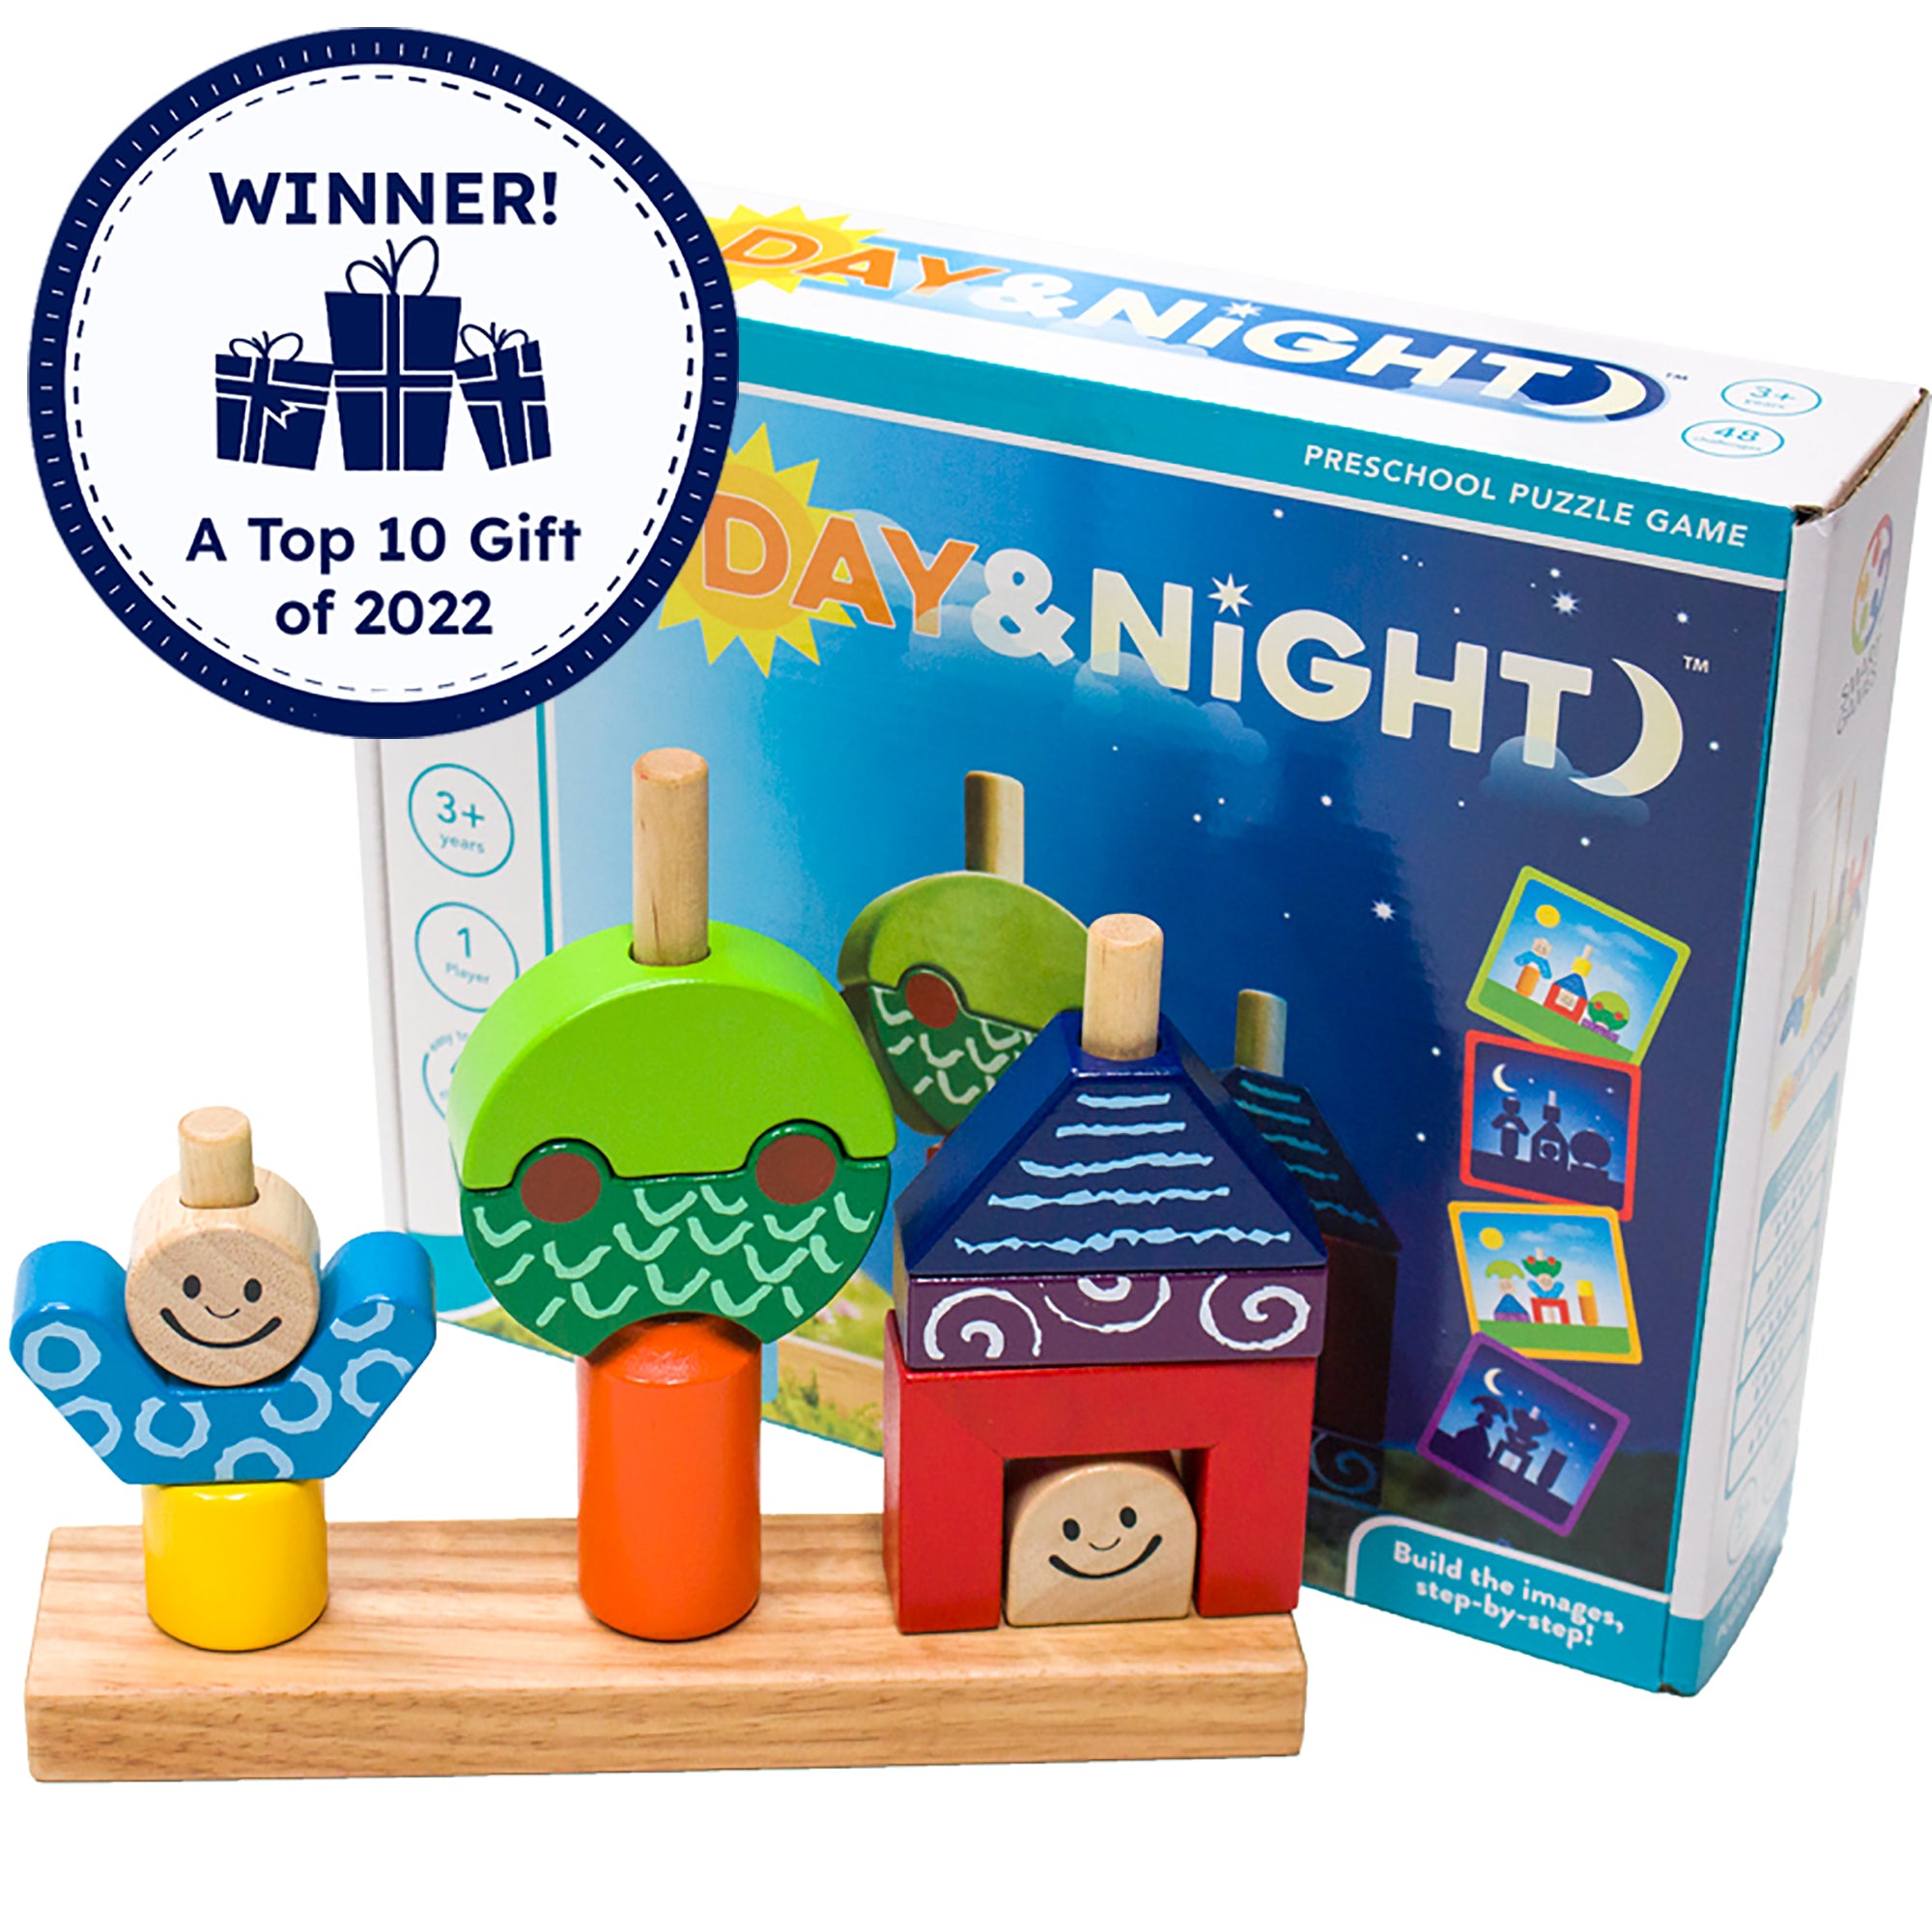 Day & Night game setup in front of the game box. The wooden game has 3 large pegs with pieces placed over the pegs. The first set of shapes forms a person with a yellow bottom, blue top, and smiling face. The second shape shows a tree shape with an orange base, with a dark and light green top. The third shape has a smiling face on bottom, a red box surrounding, a purple rectangle, and a blue triangle at the top, looking like a person in a house. A “Winner! A top 10 gift of 2022” badge is in the top-left.